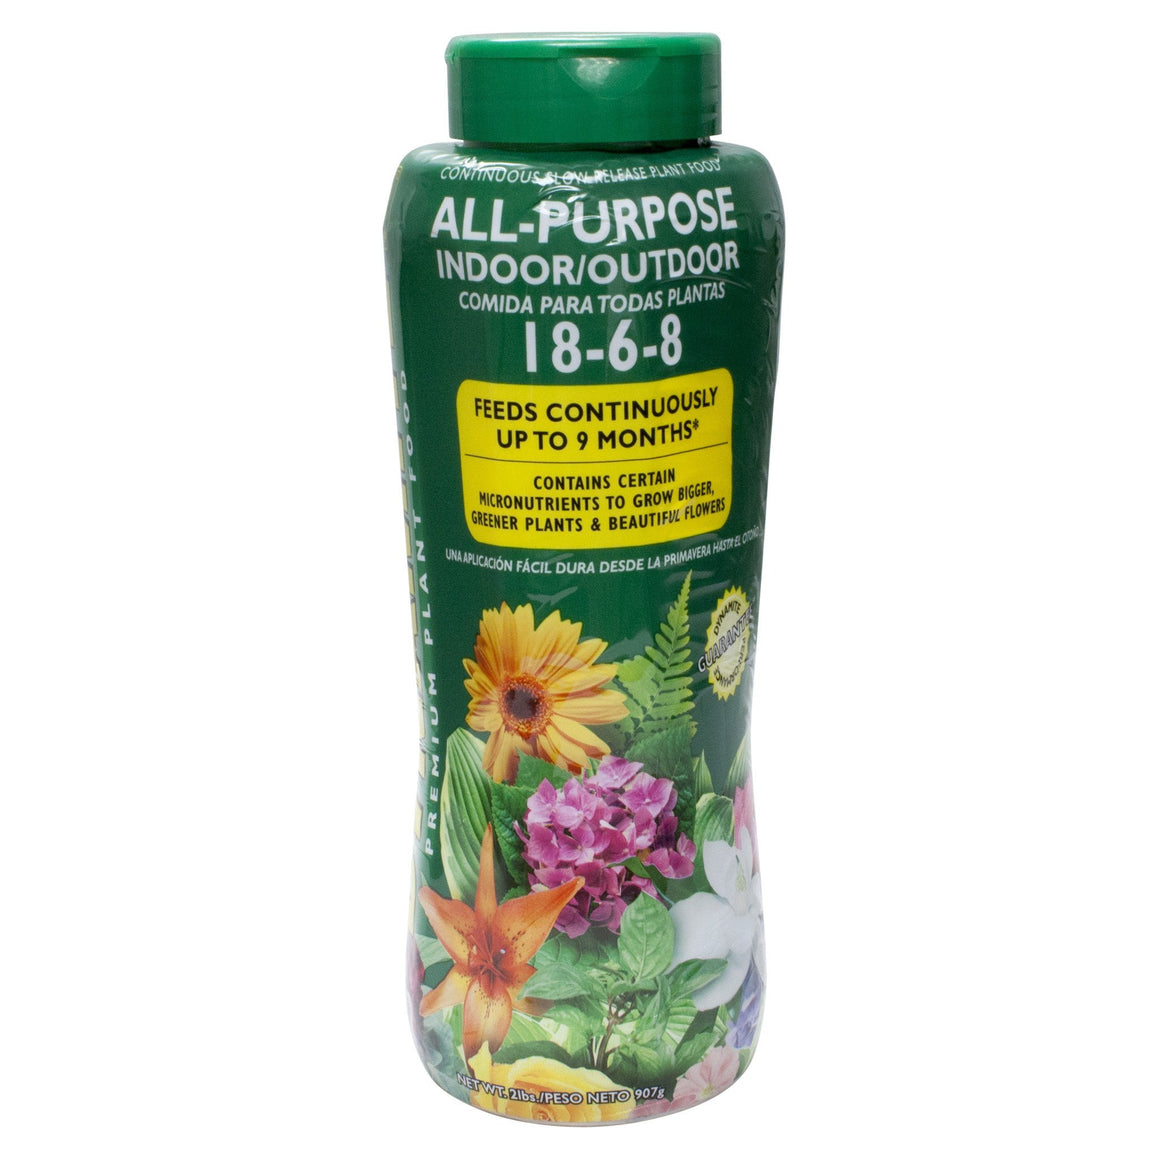 Dynamite All-Purpose Indoor/Outdoor Plant Food 18-6-8 - 2 Lb. - Seed World